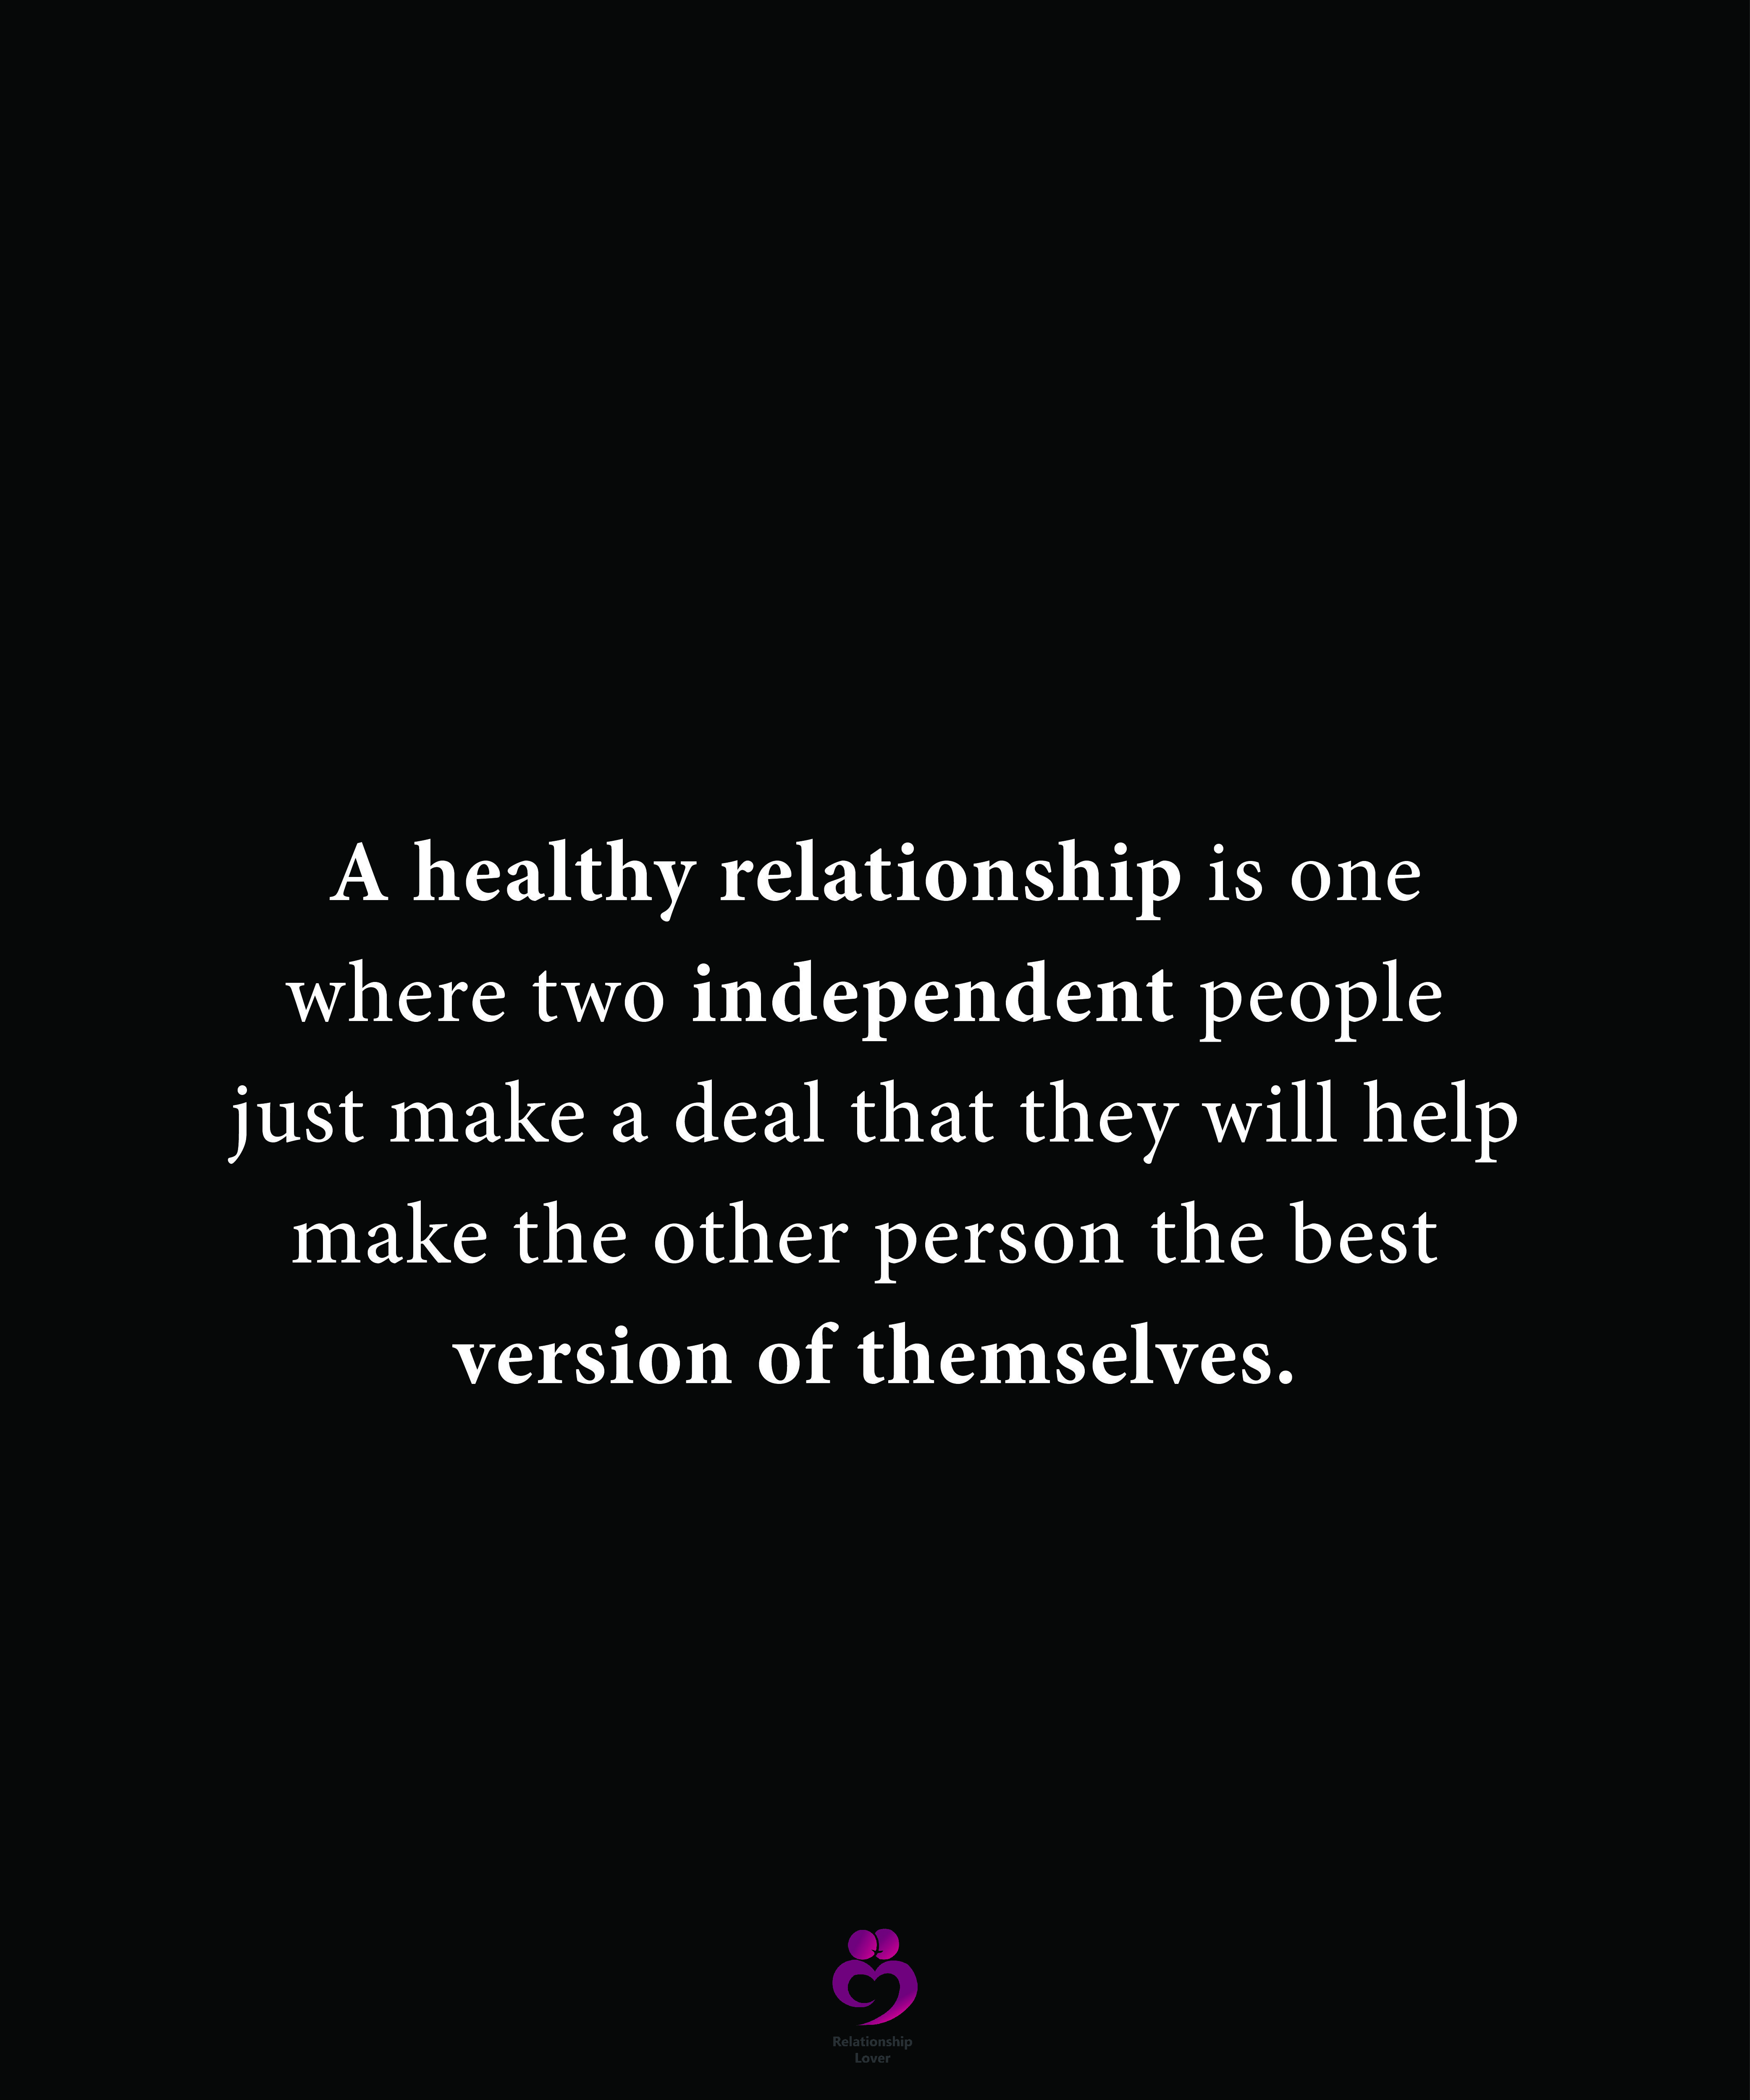 A Healthy Relationship is One Where Two Independent People 11020 1